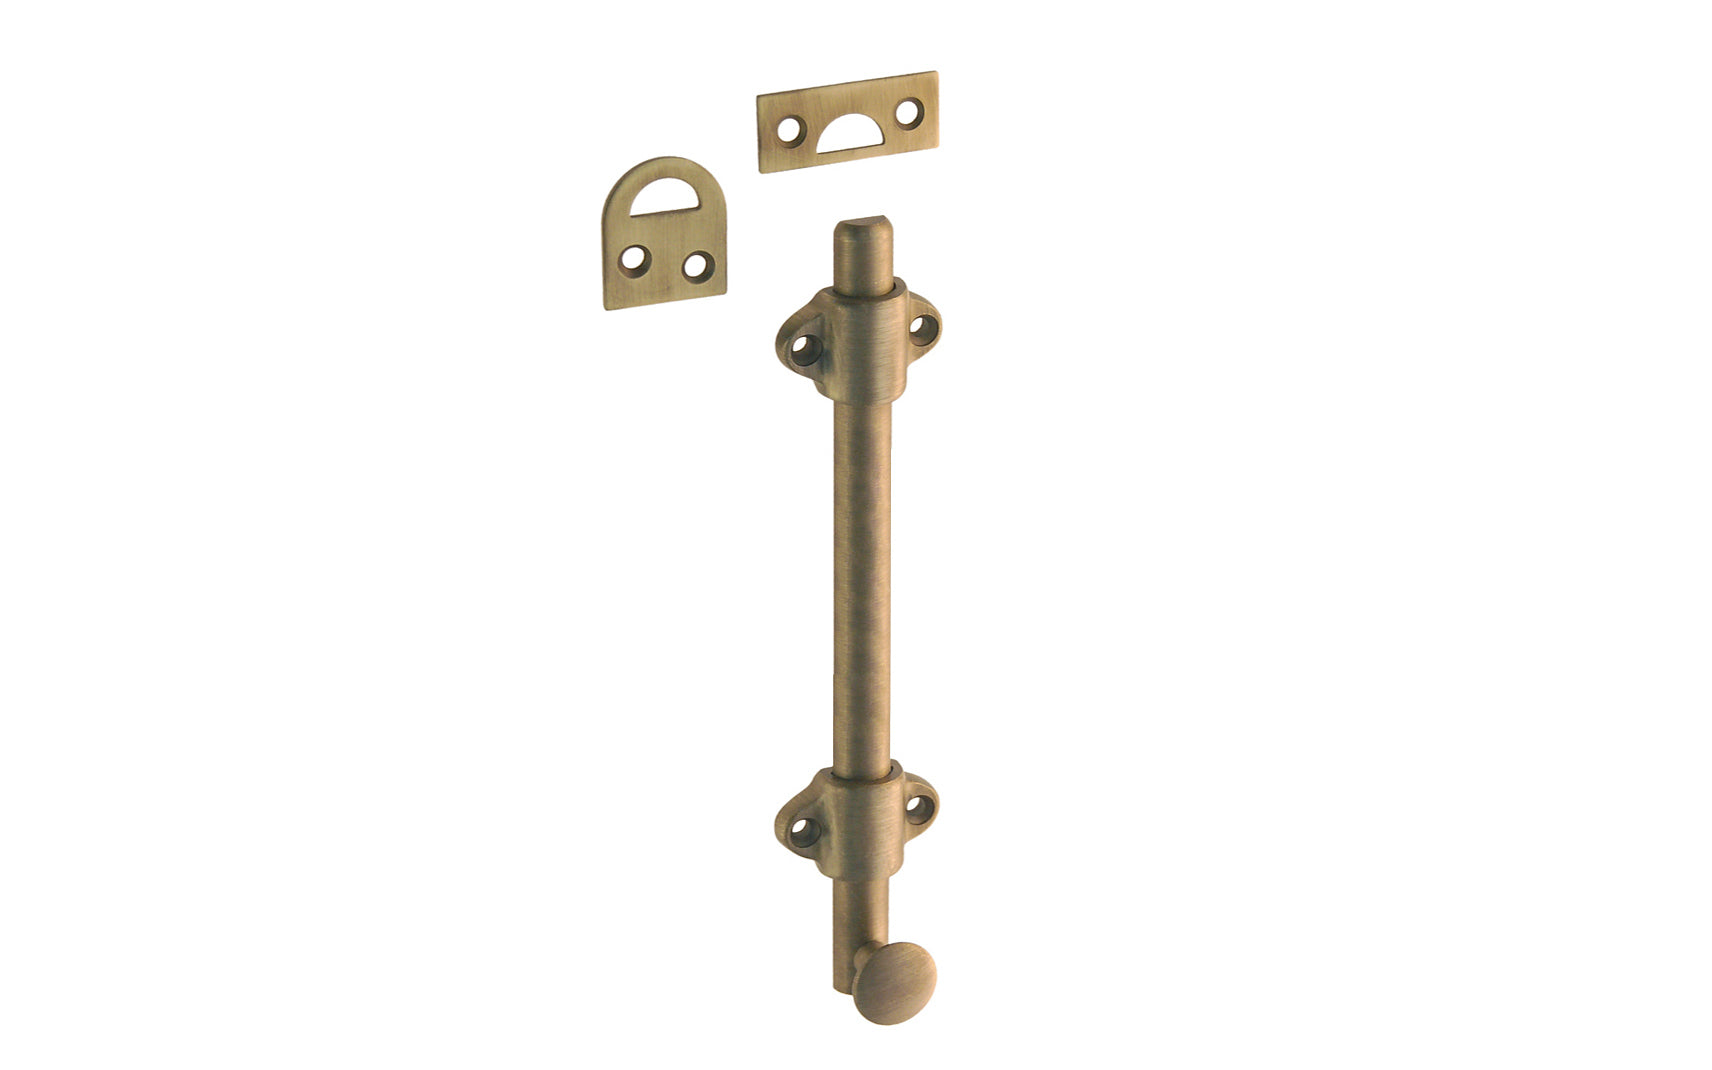 Vintage-style Hardware · Classy & handsome solid brass medium-duty surface bolt. Great for windows, doors, French windows, cabinets. 1/2" diameter half-rod with 1-3/8" wide guide brackets (stays) & 3/4" diameter knob. Includes small mortise strike & rim strike, & six slotted flat head screws. Solid Brass Dutch Bolt. Antique Brass Finish.